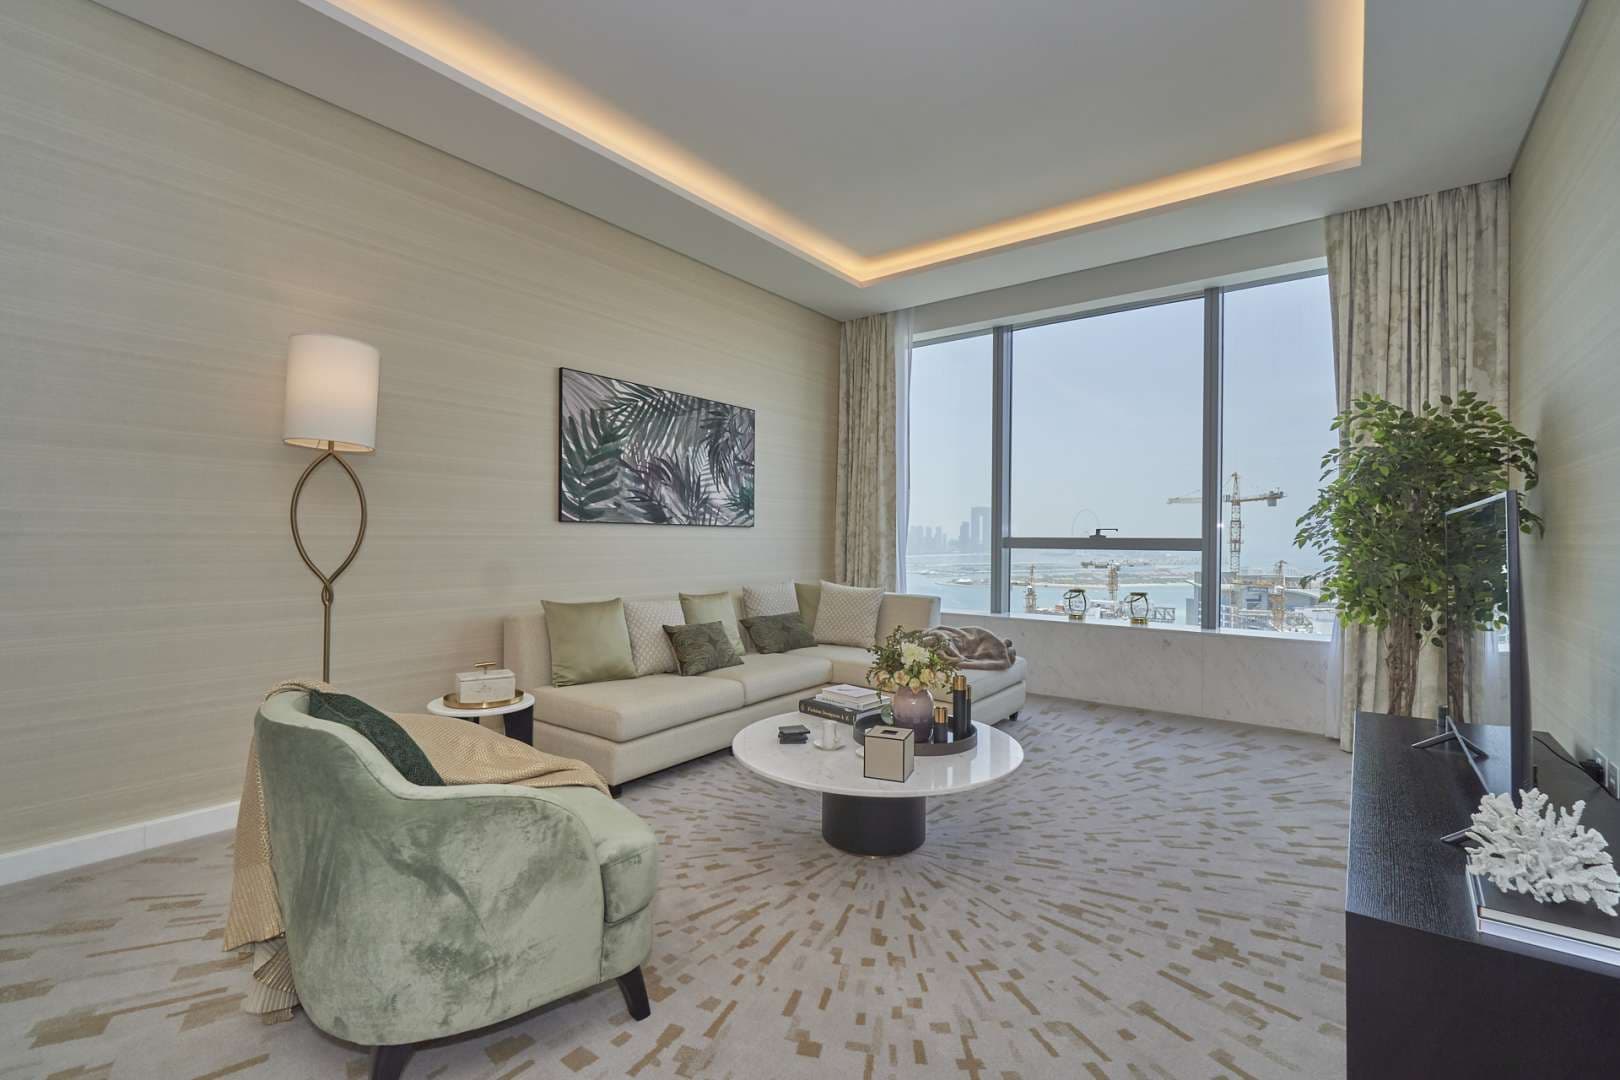 1 Bedroom Apartment For Sale The Palm Tower Lp07385 58f51c32f4bc8c0.jpg